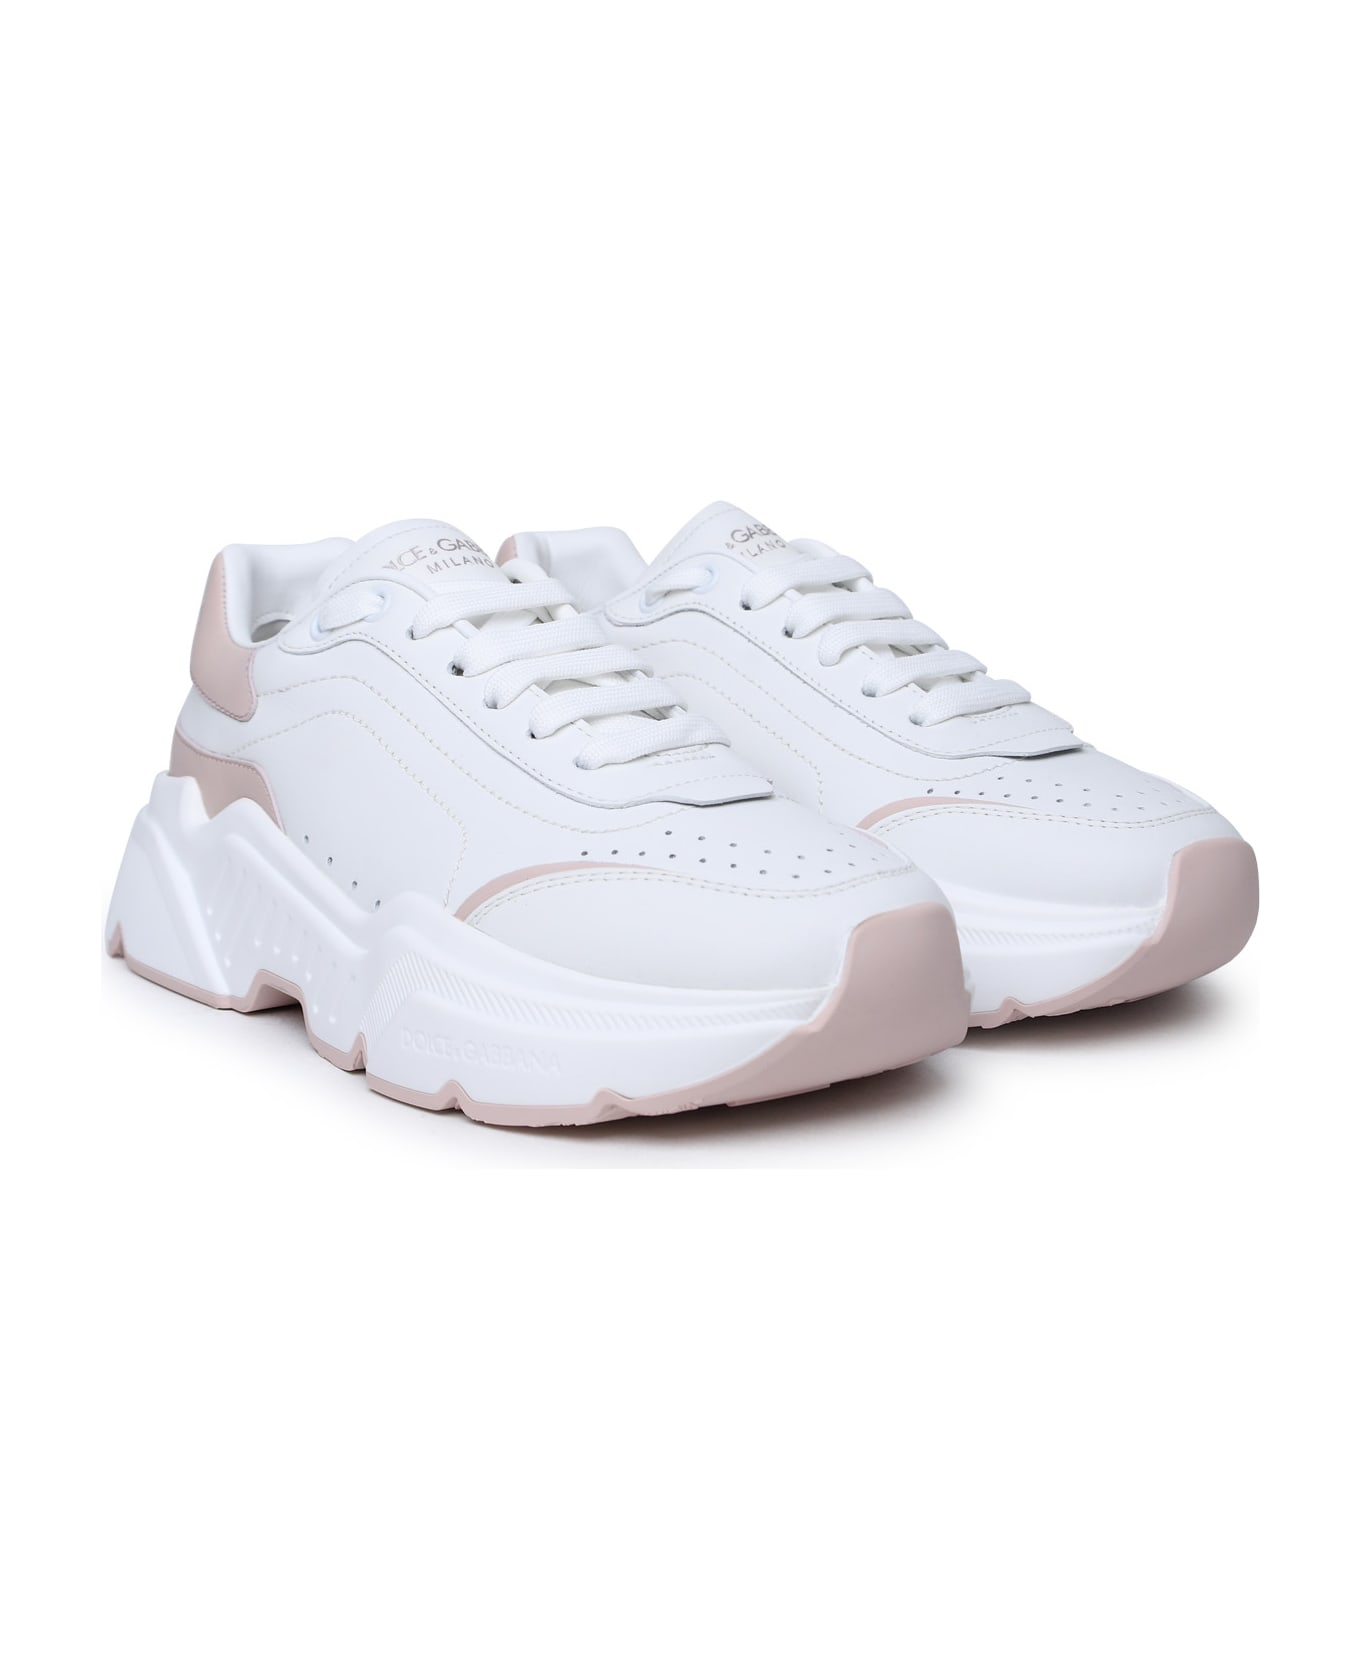 Dolce & Gabbana 'daymaster' White Leather Sneakers - Pink